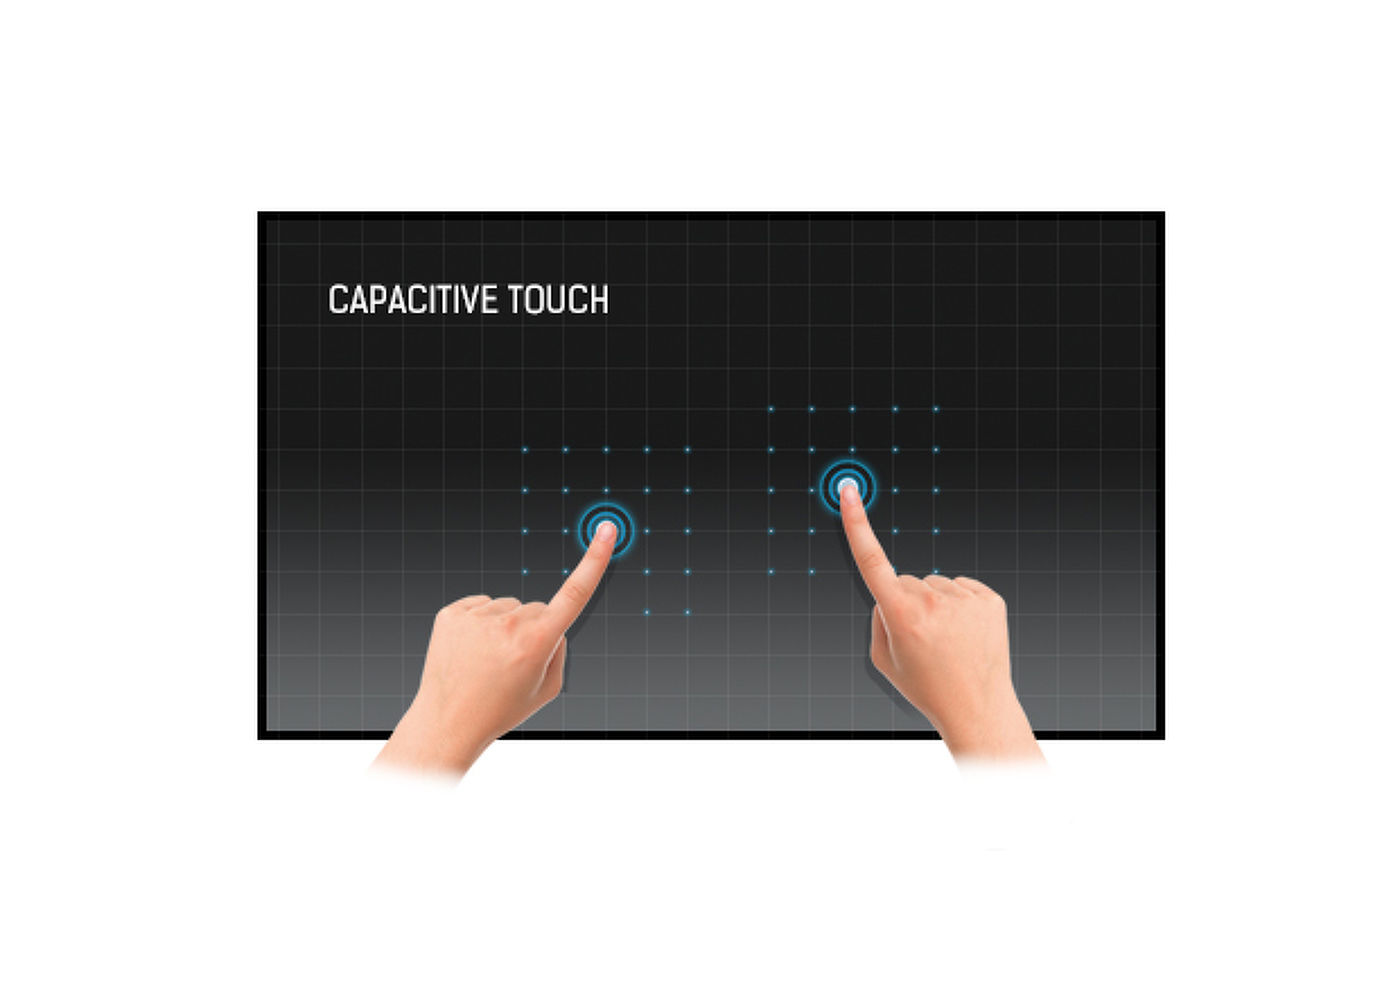 Touch technology - Capacitive